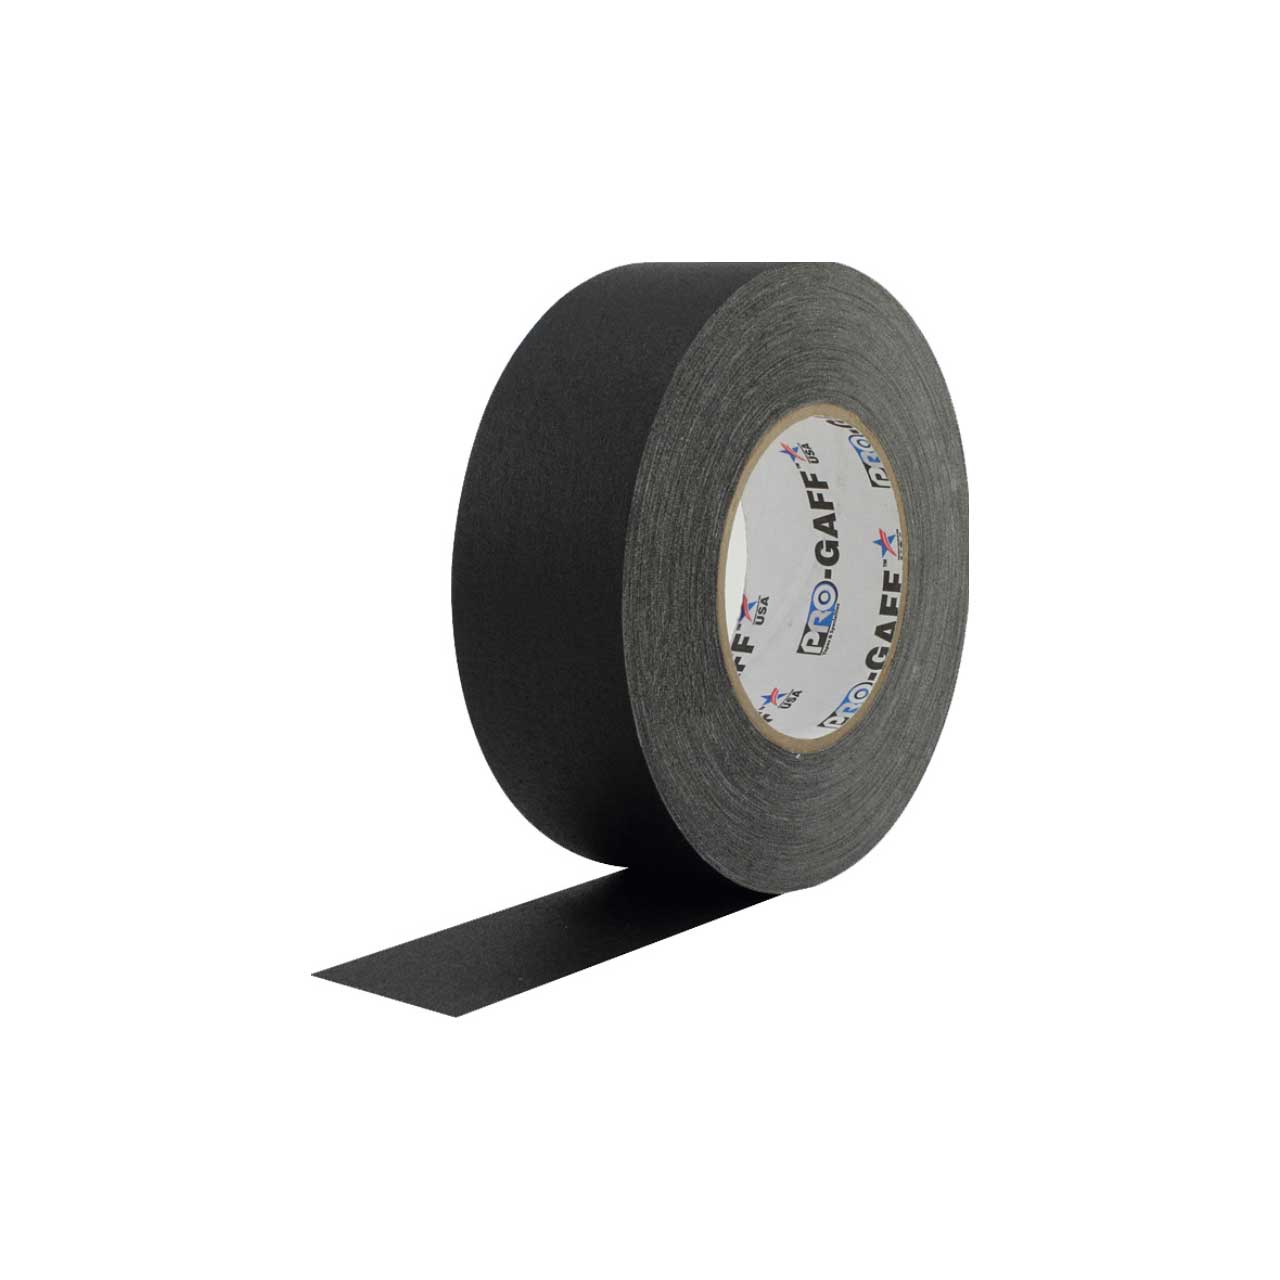 Pro Tapes SGT55-4-12 Pro Gaff Gaffers Tape SGT4-60 4 Inch x 55 Yards - Gray - 12 Pack SGT55-4-12